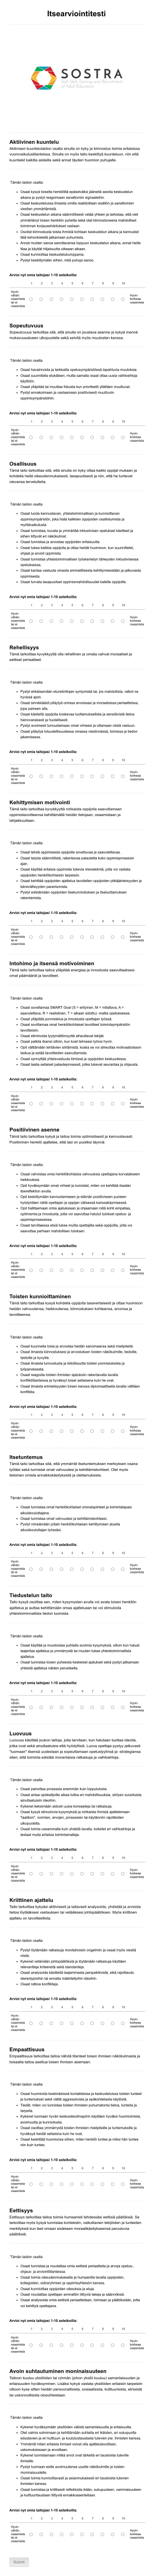 Self Reflective Test Sostra Project FI Form Template